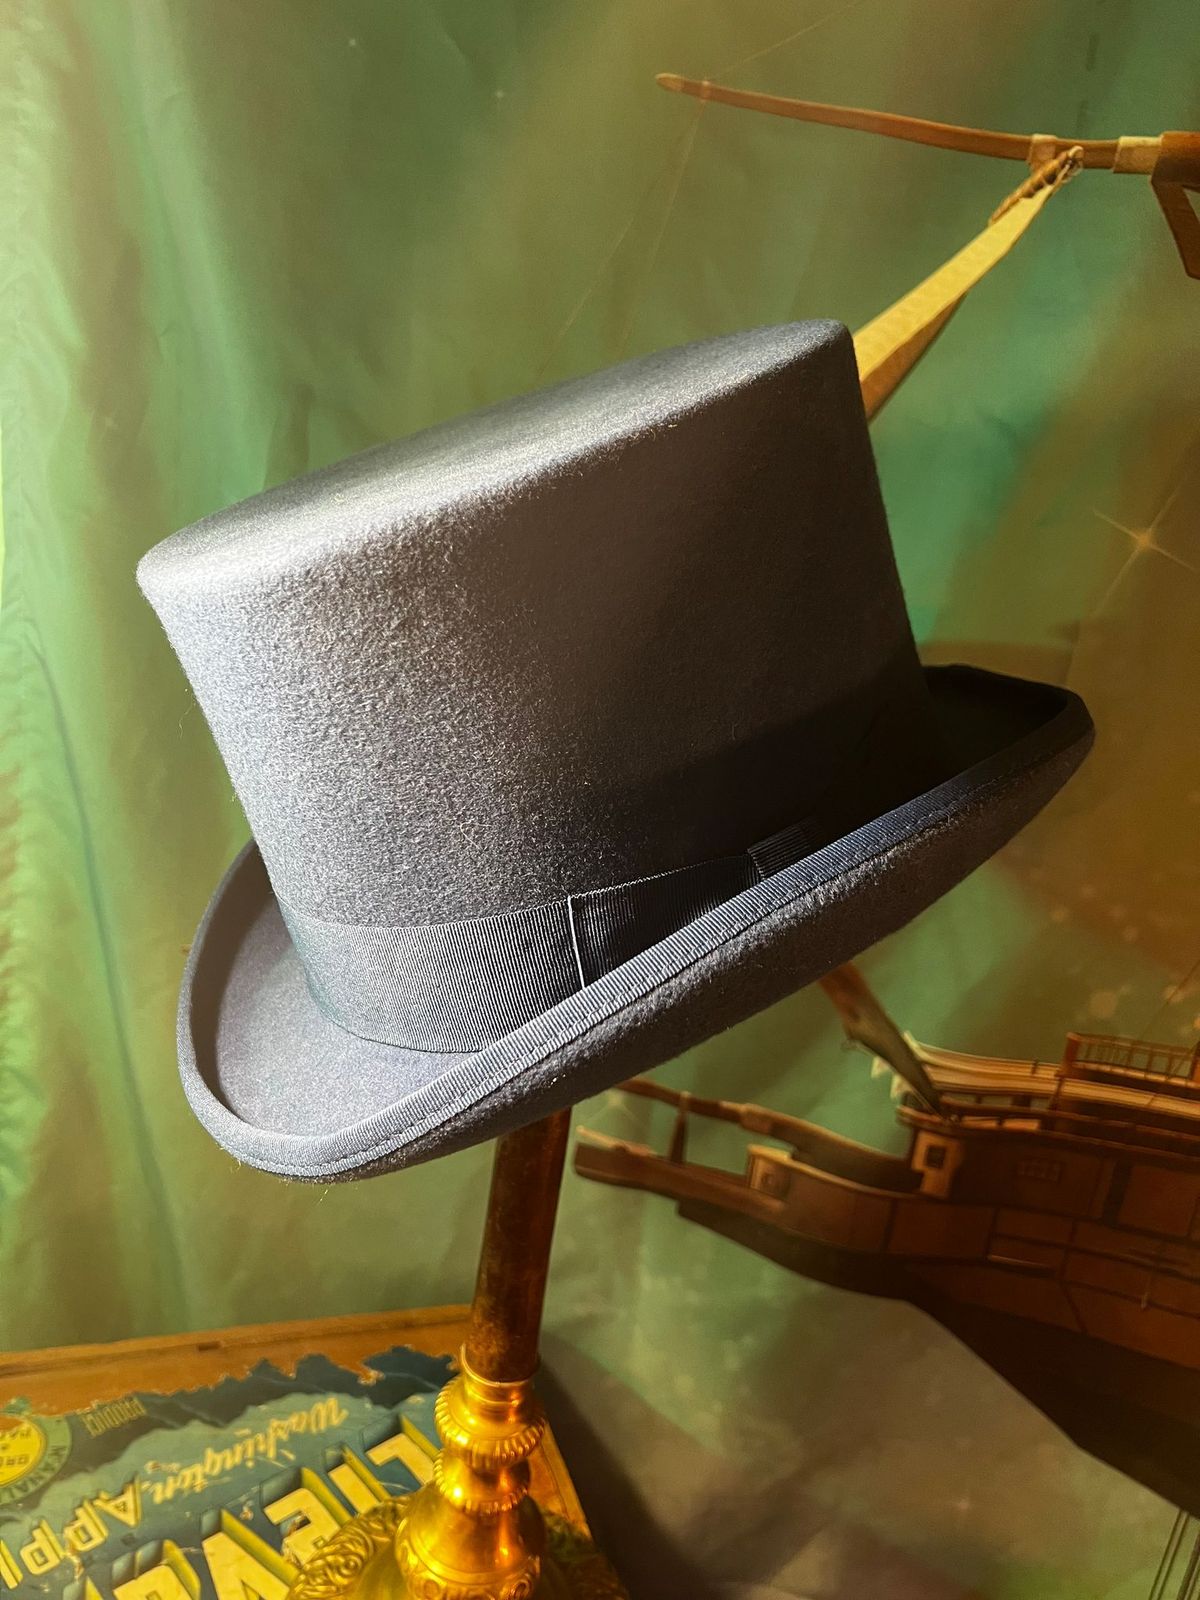  Top Hat with Victorian, gothic, bridgerton and steampunk flare